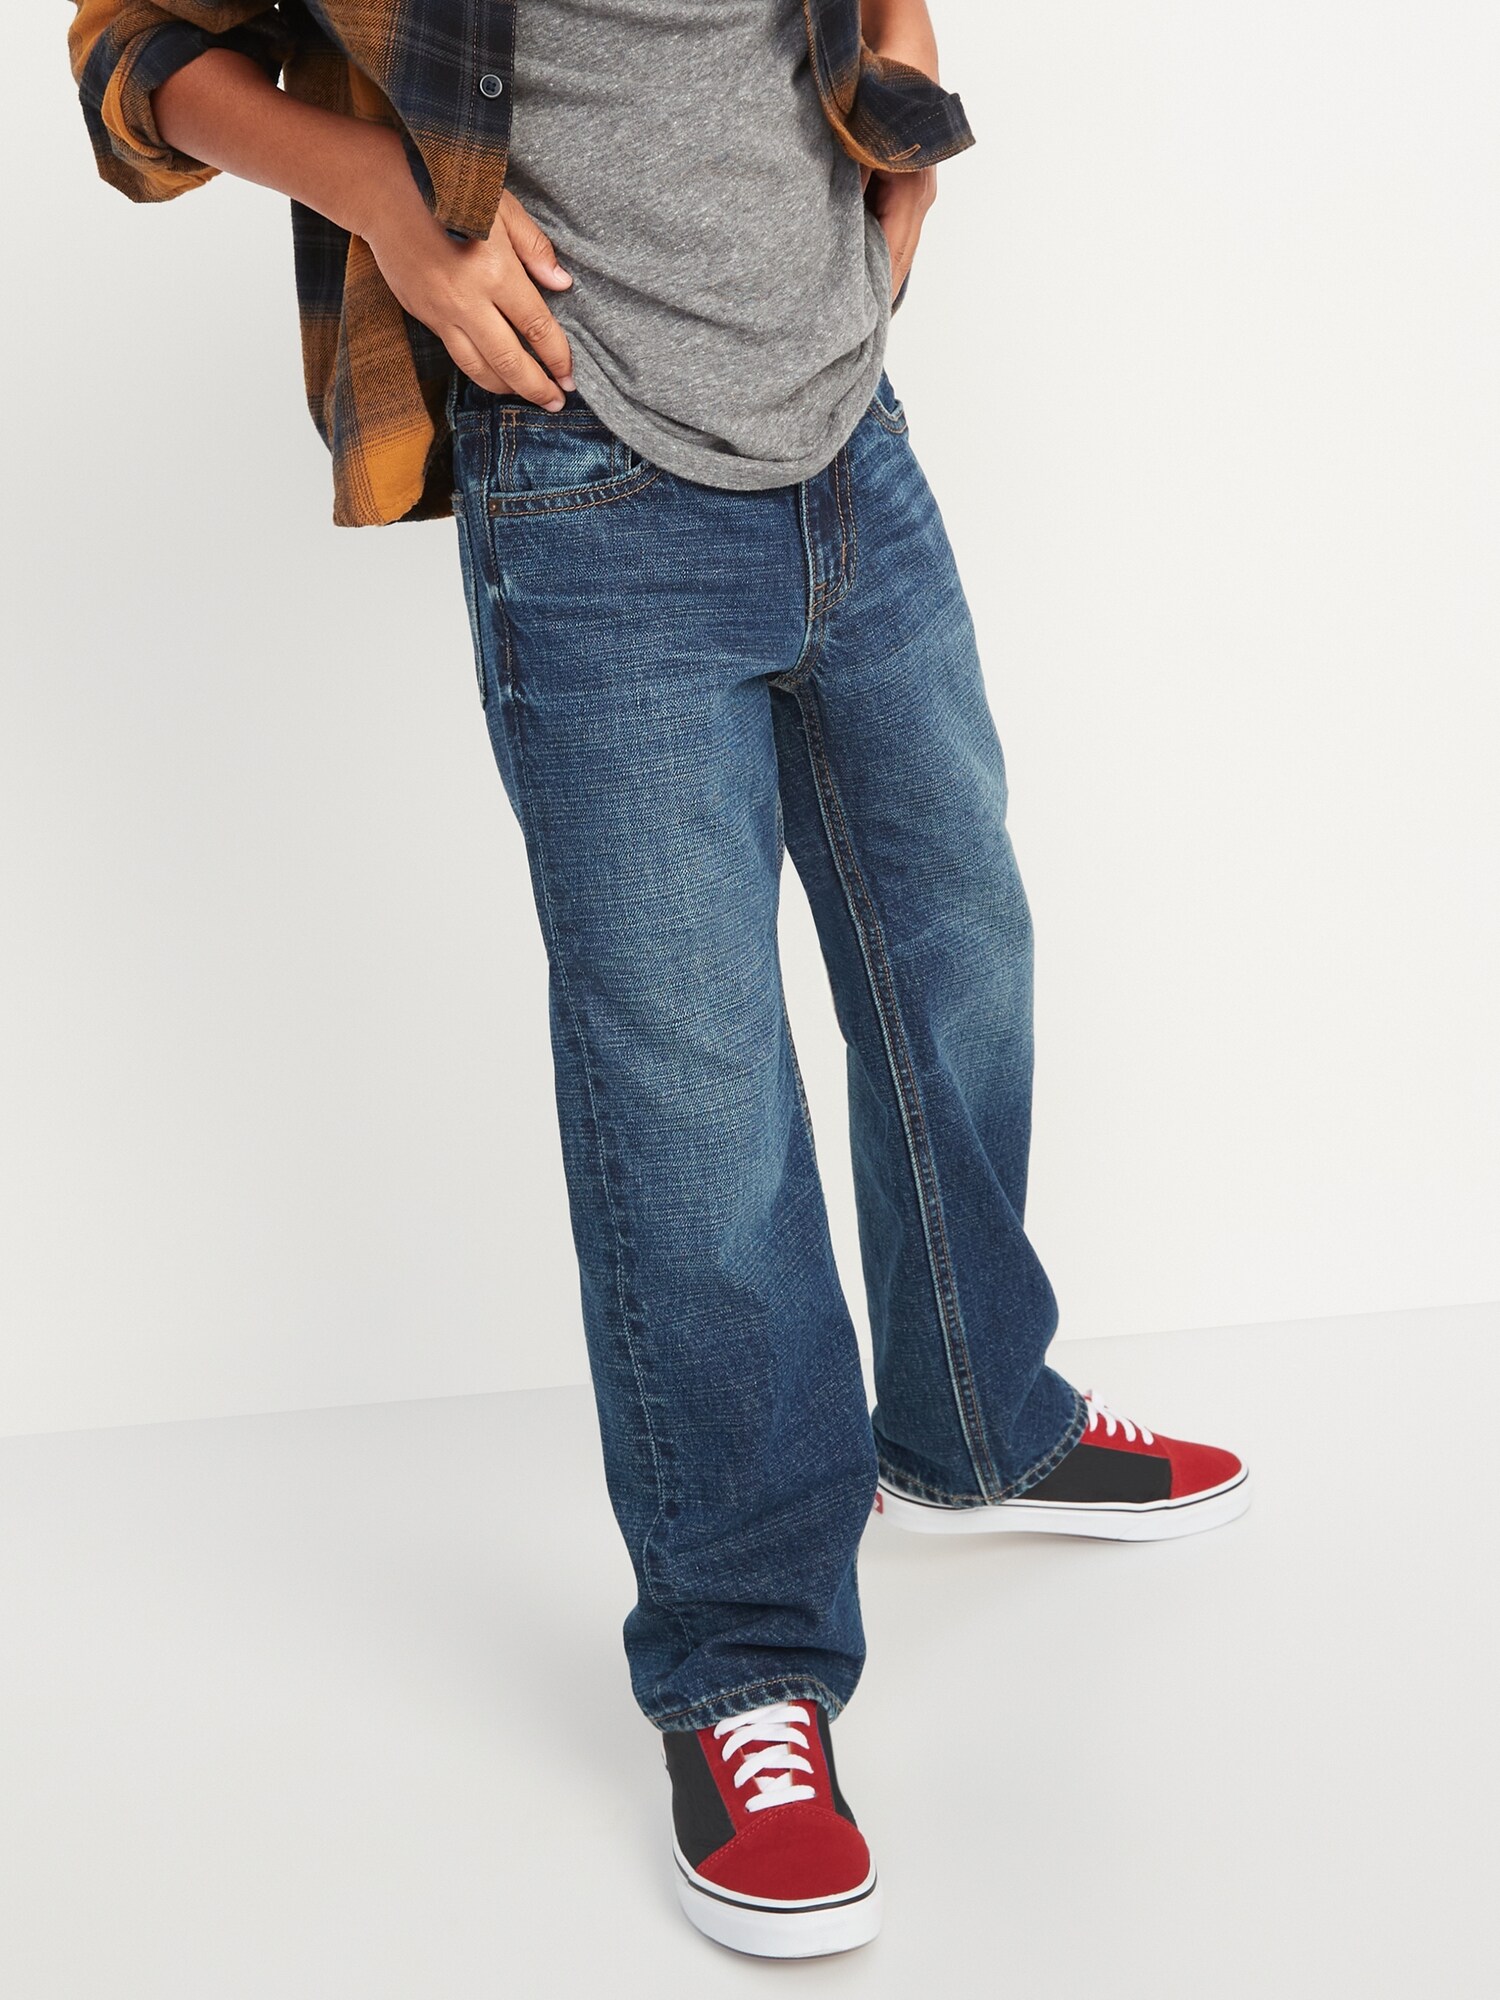 Non-Stretch Loose-Fit Jeans for Boys